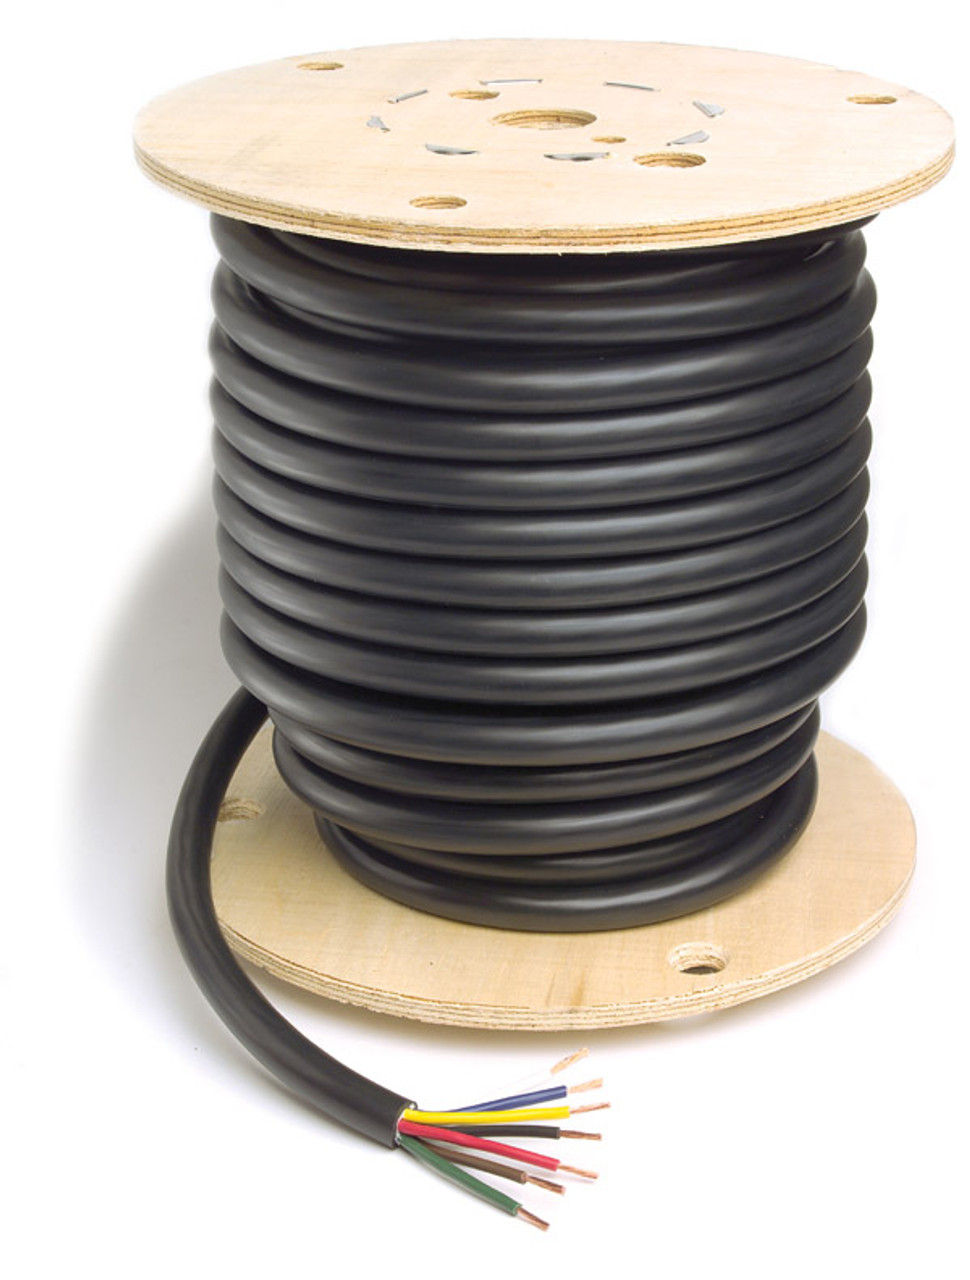 14/4 AWG Trailer Cable PVC @ 500' - Brown/Green/Red/Amber  82-5601